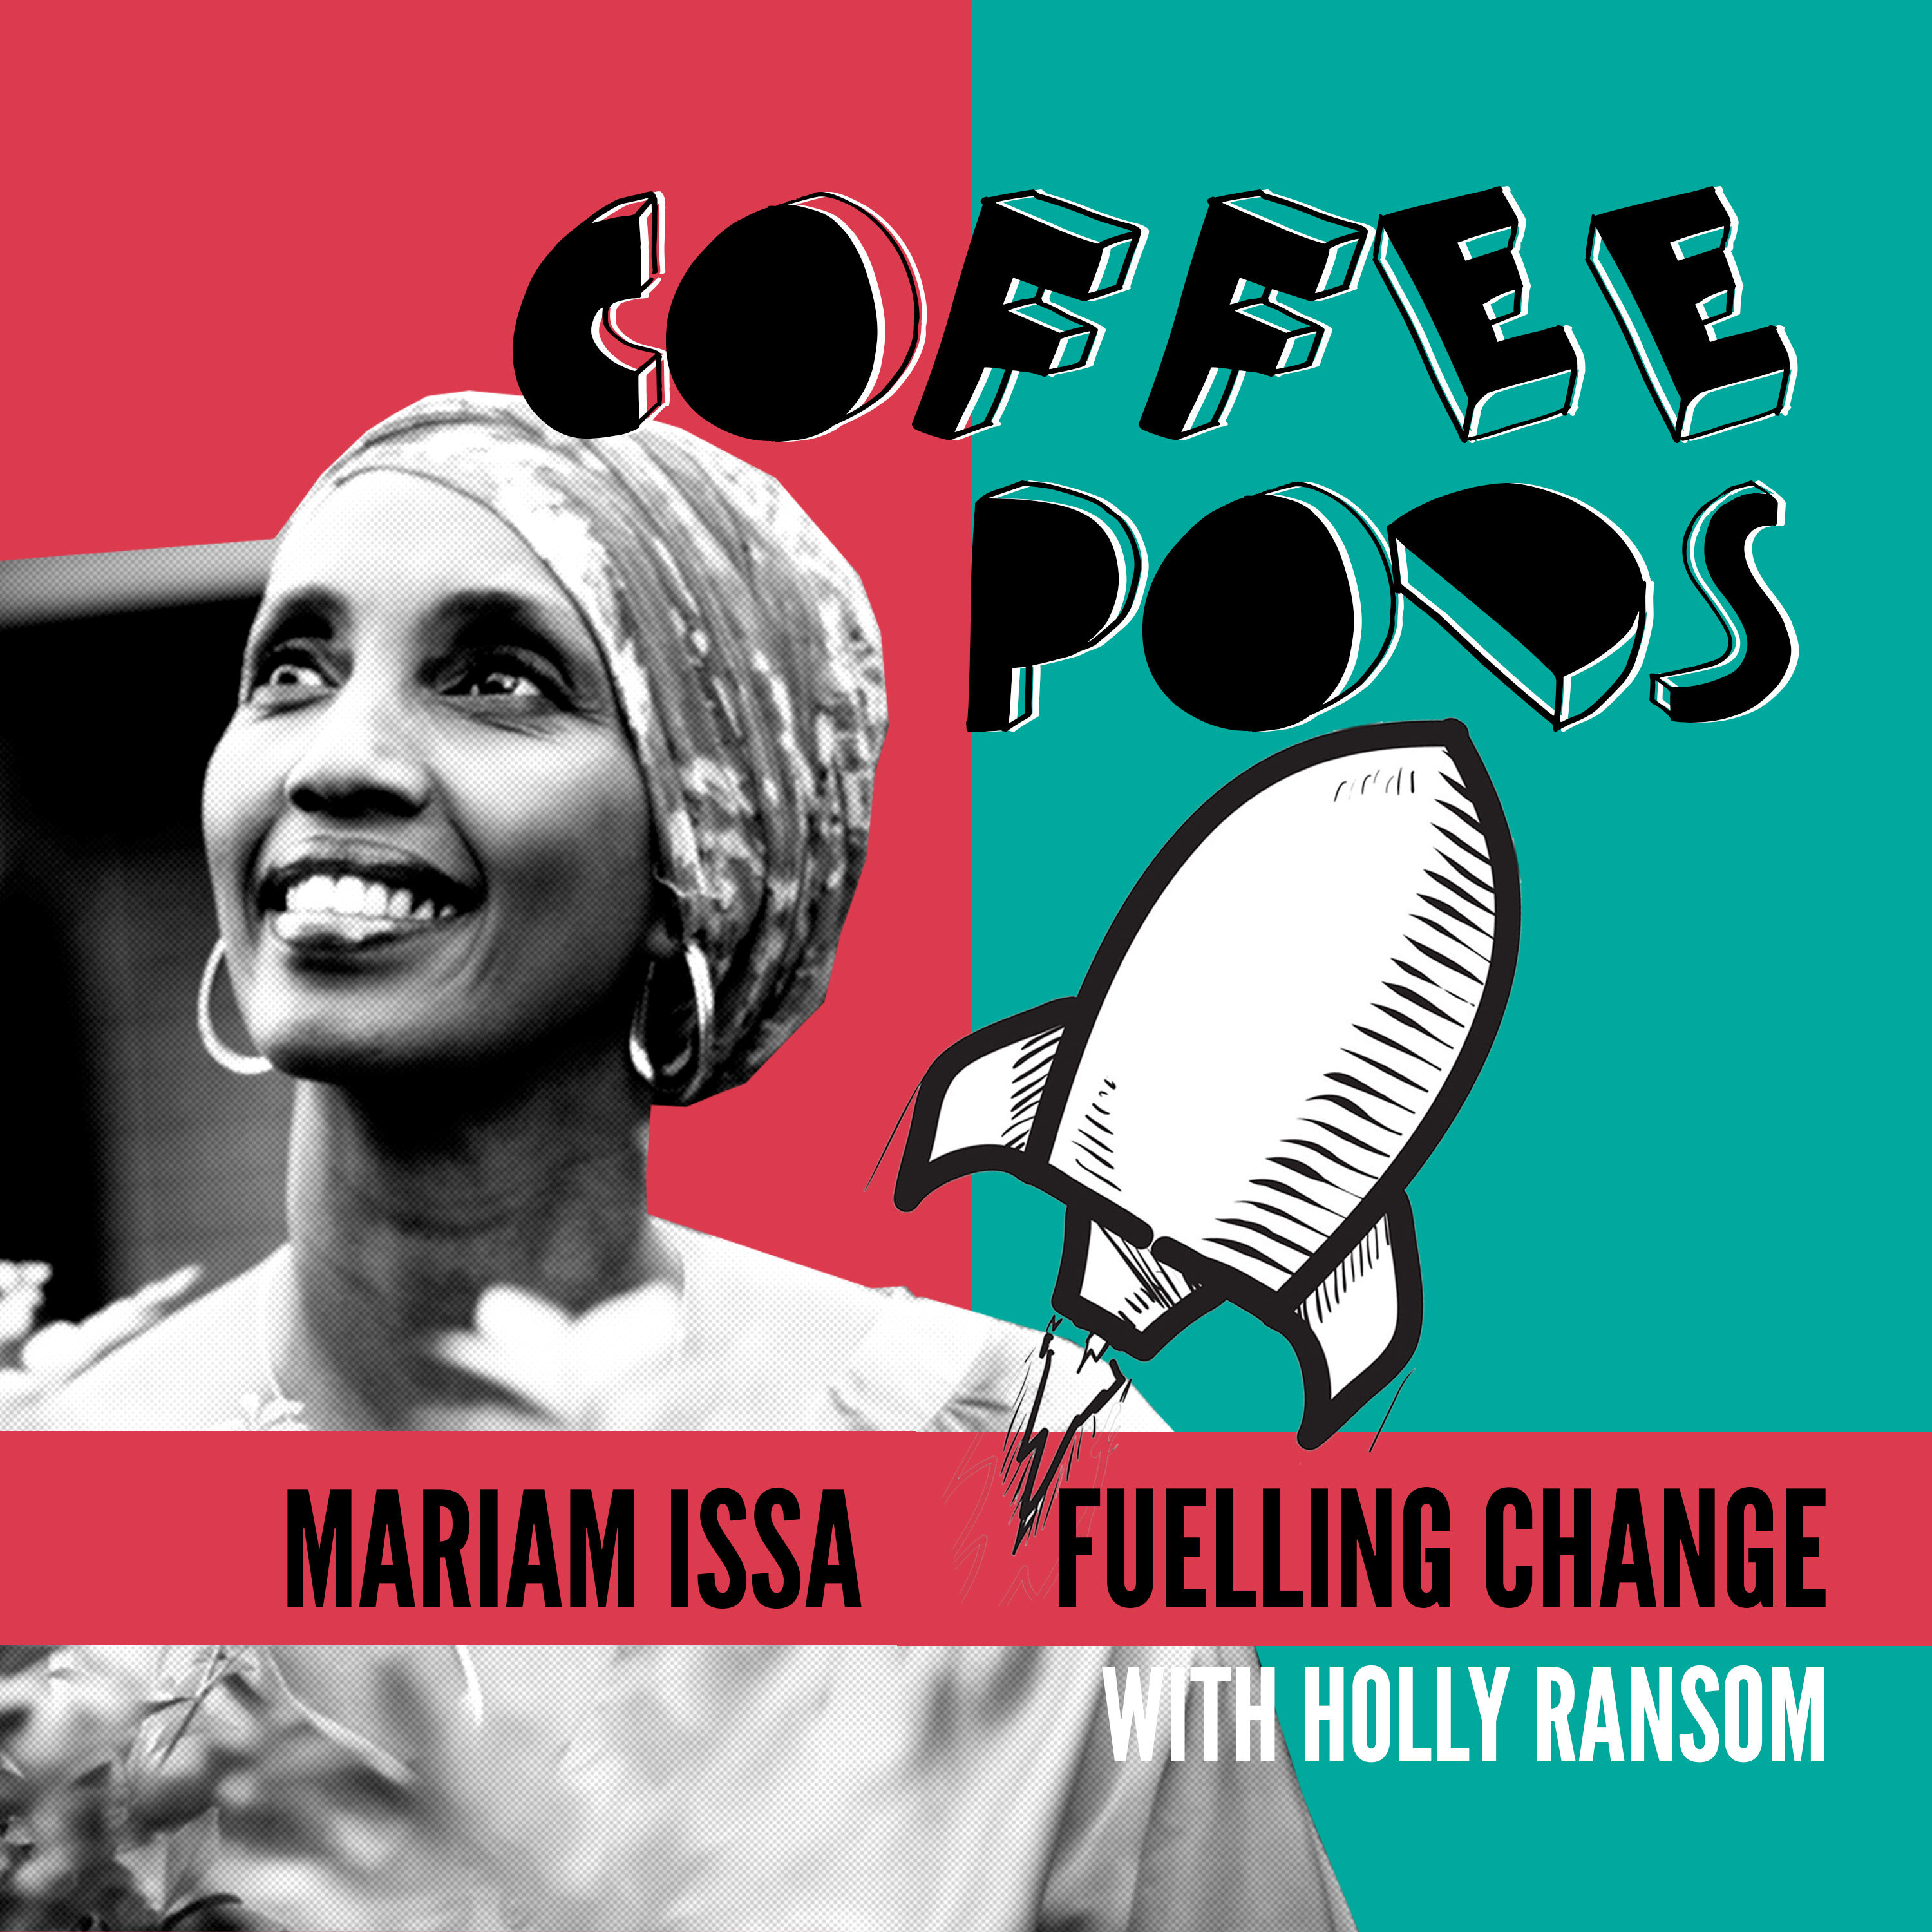 Coffee Pod #73: Mariam Issa is an empowered refugee, sharing a story of resilience and imparting the power of community, self-narrative and finding opportunity amid adversity